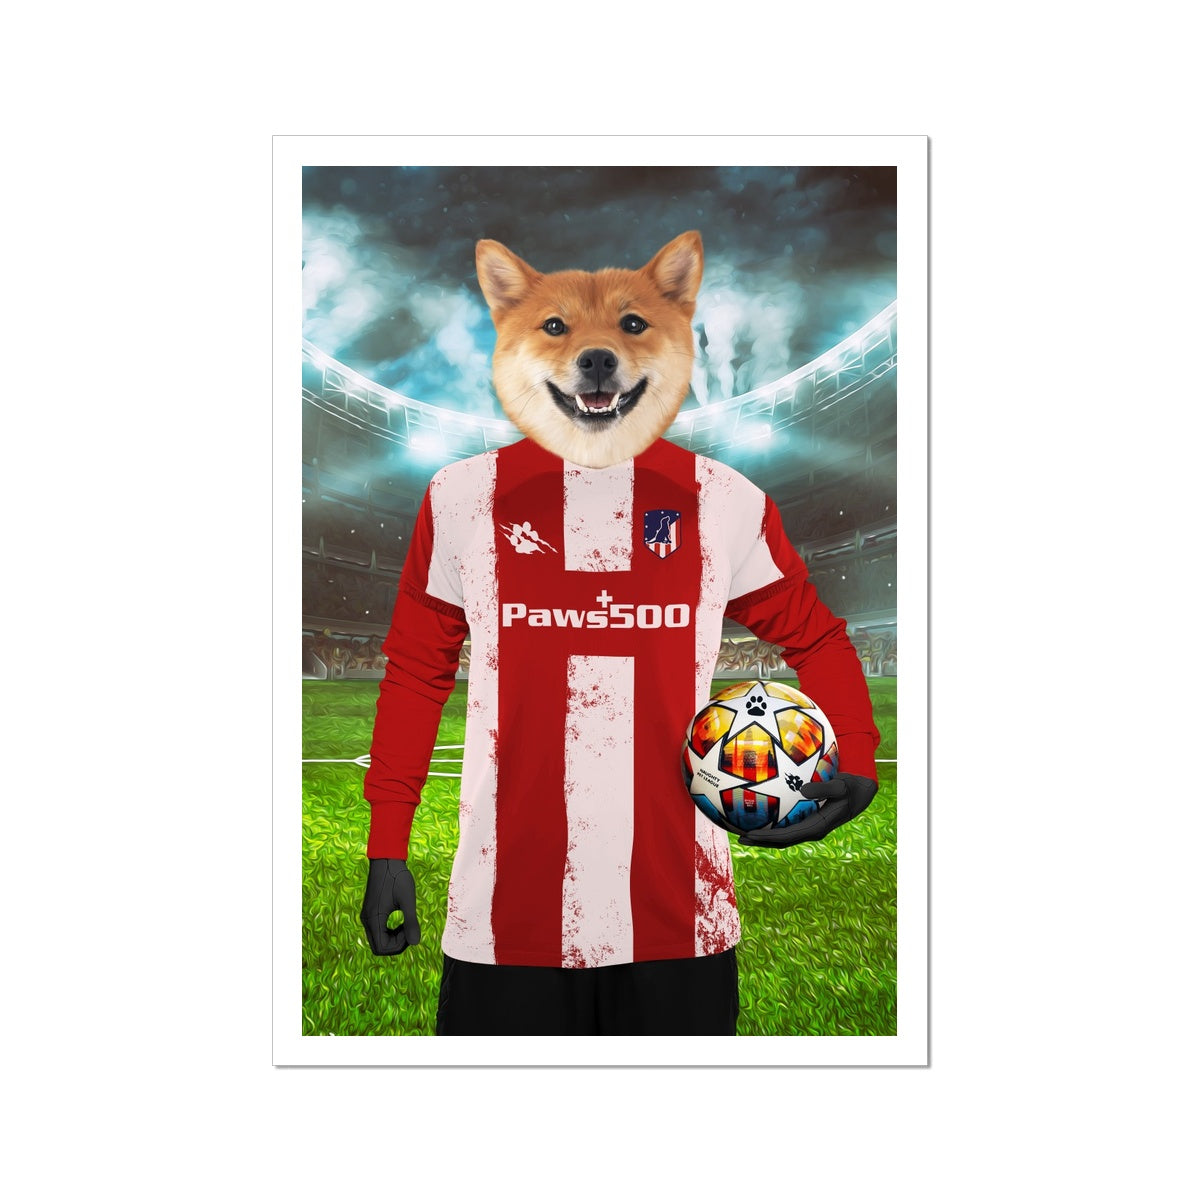 Pawtheletico Madrid Football Club Paw & Glory, paw and glory, best dog artists, aristocrat dog painting, dog drawing from photo, pet portraits leeds, dog portrait background colors, drawing dog portraits, pet portrait